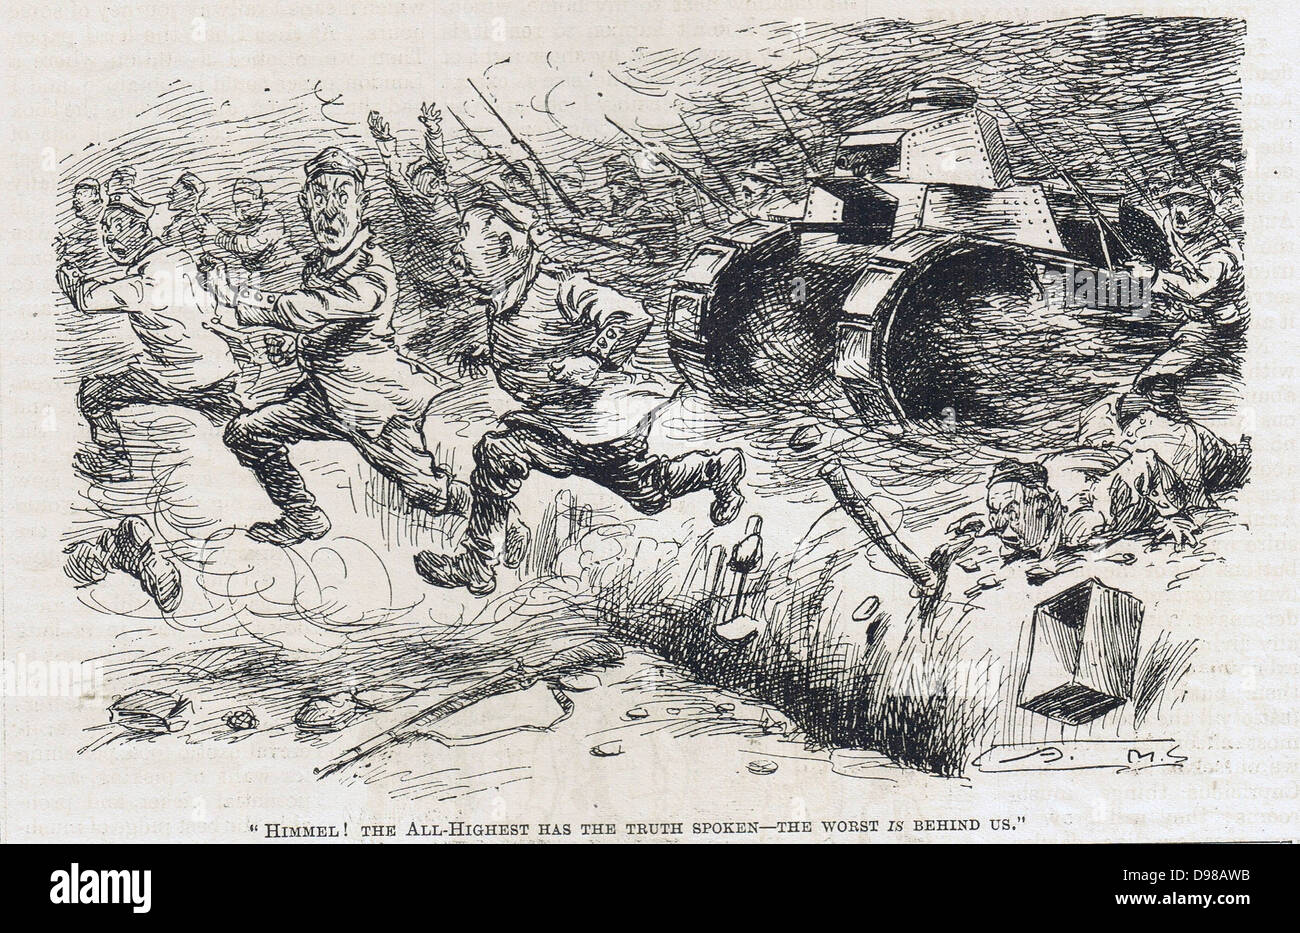 Himmel! The All-Highest has the truth spoken - the worst is behind us'. German infantry retreating in panic before Allied infantry supported by tanks. World War I cartoon from 'Punch', London, 21 August 1918. Stock Photo